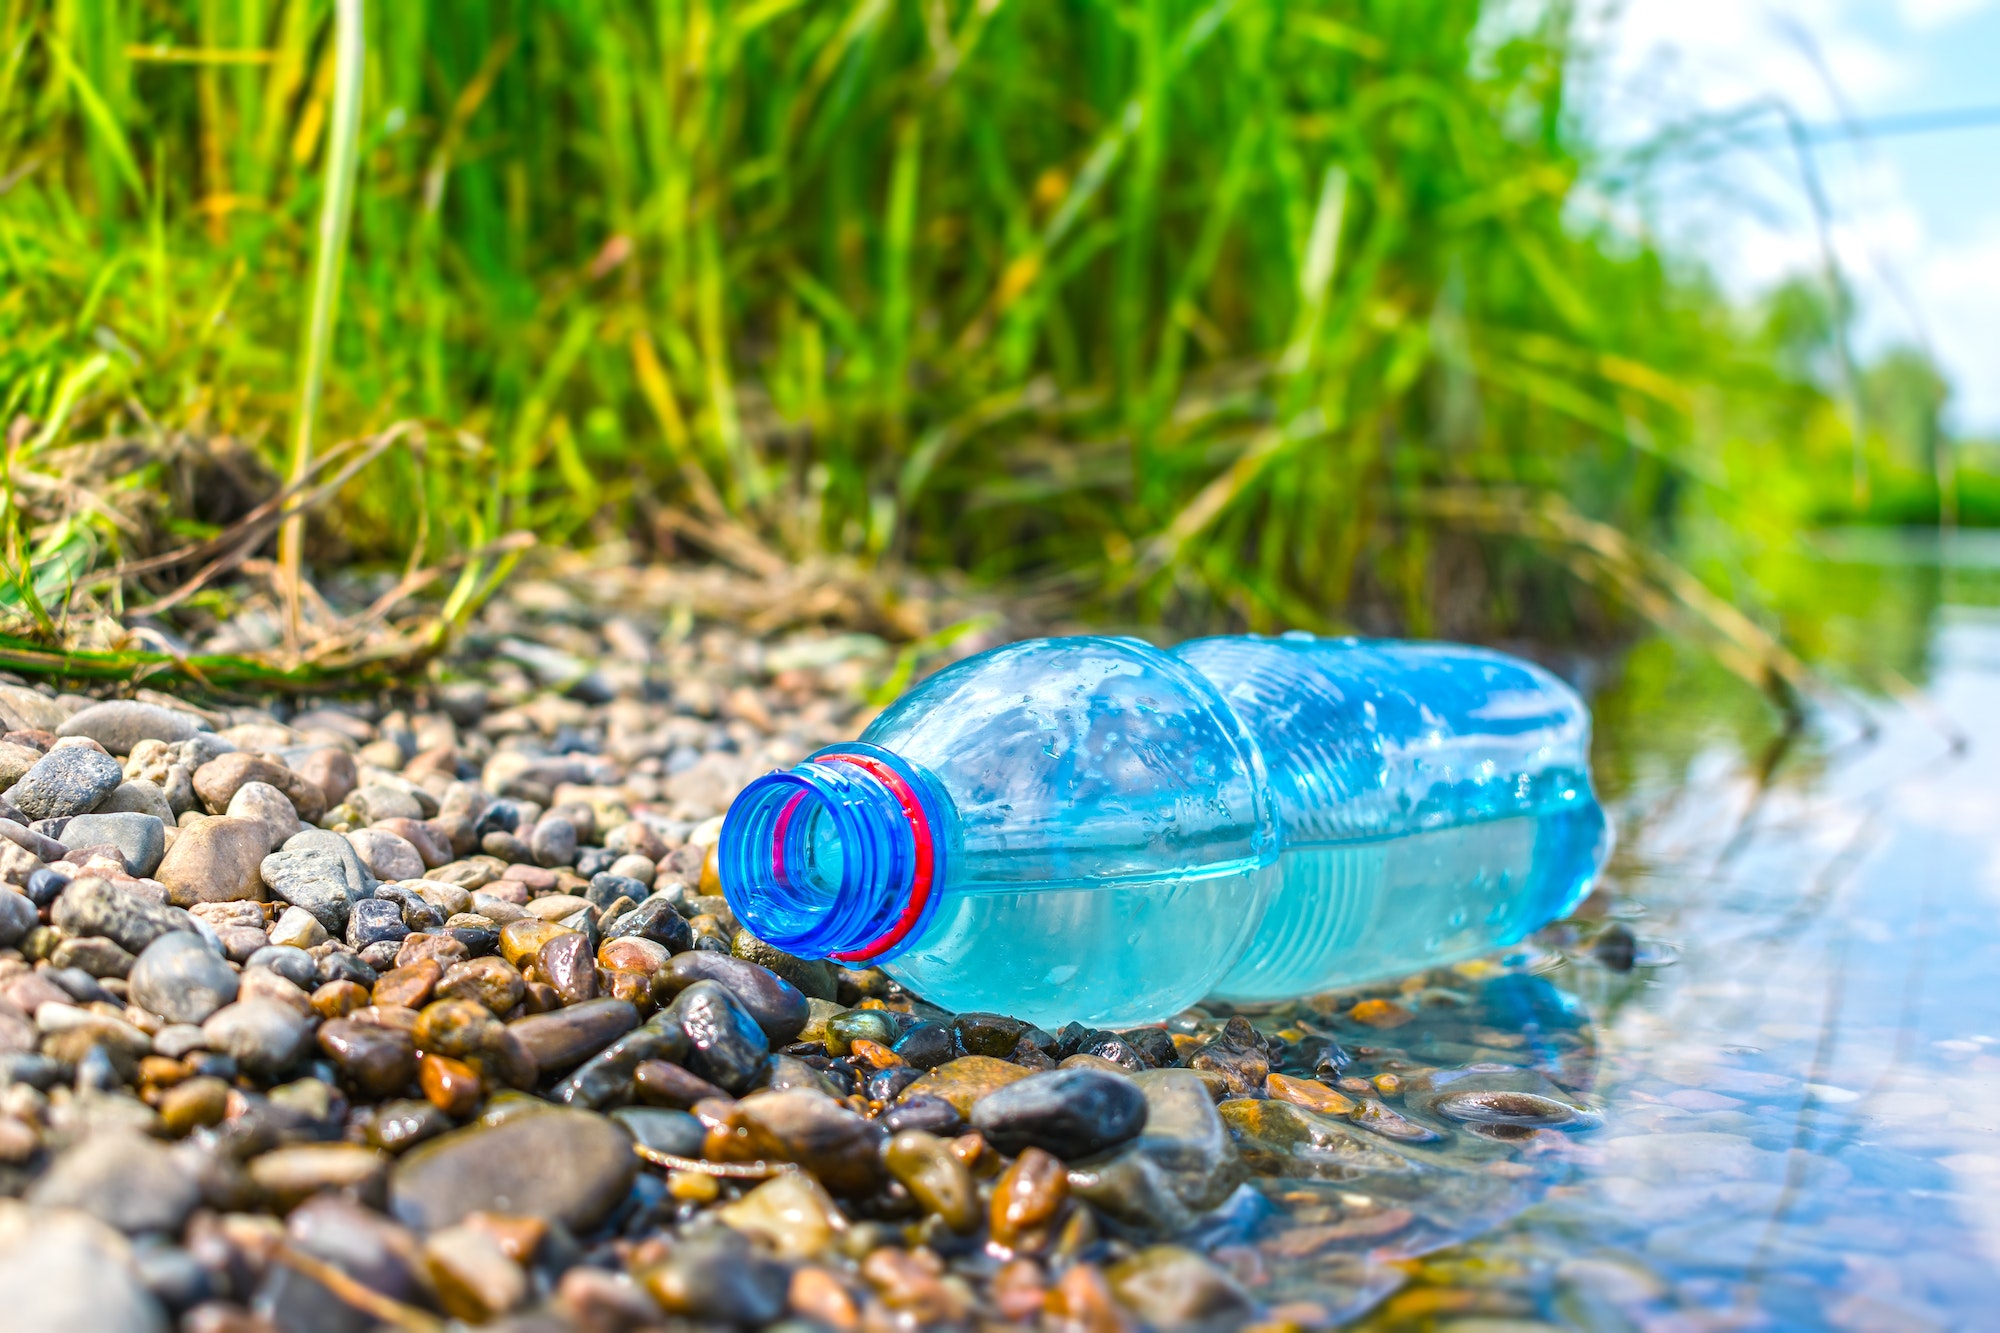 The problem of environmental pollution with plastic. A plastic bottle discarded on the riverbank